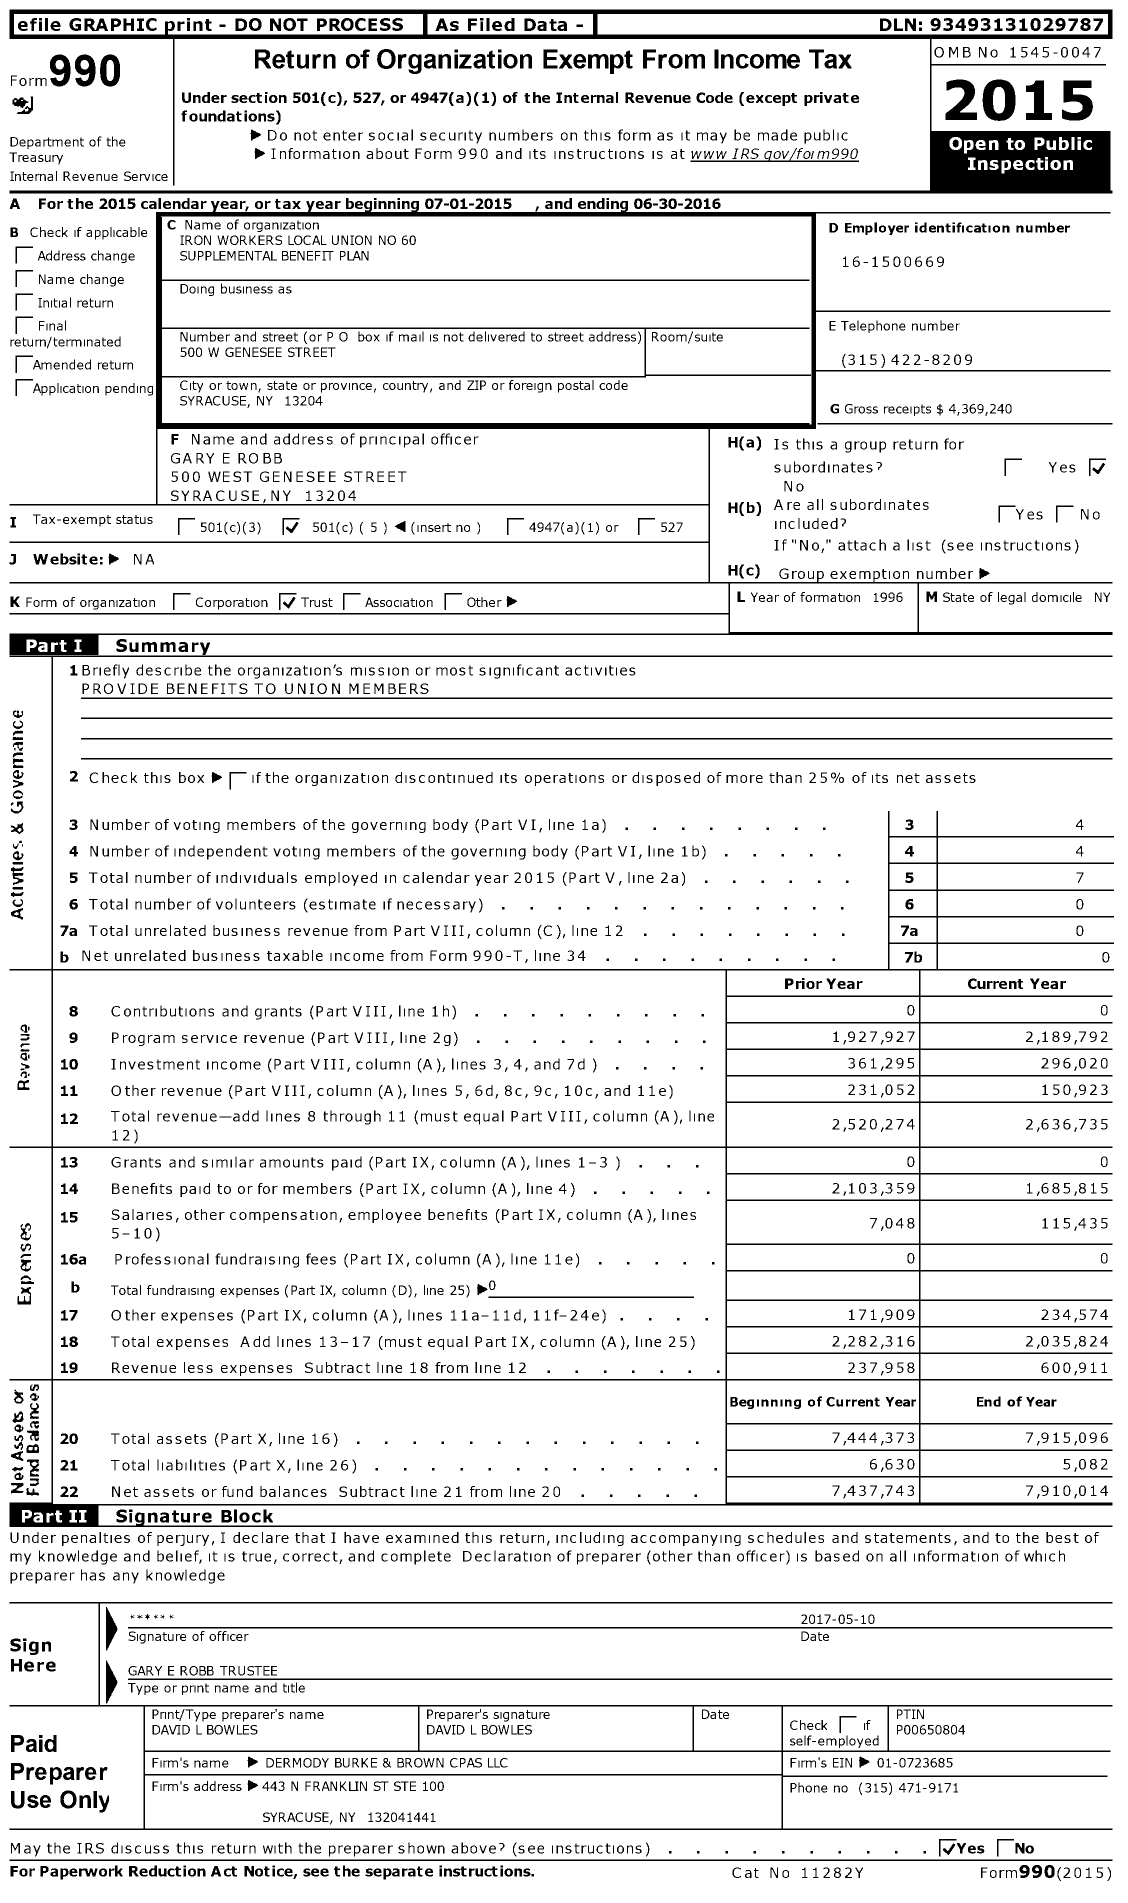 Image of first page of 2015 Form 990O for Iron Workers Local Union No 60 Supplemental Benefit Plan